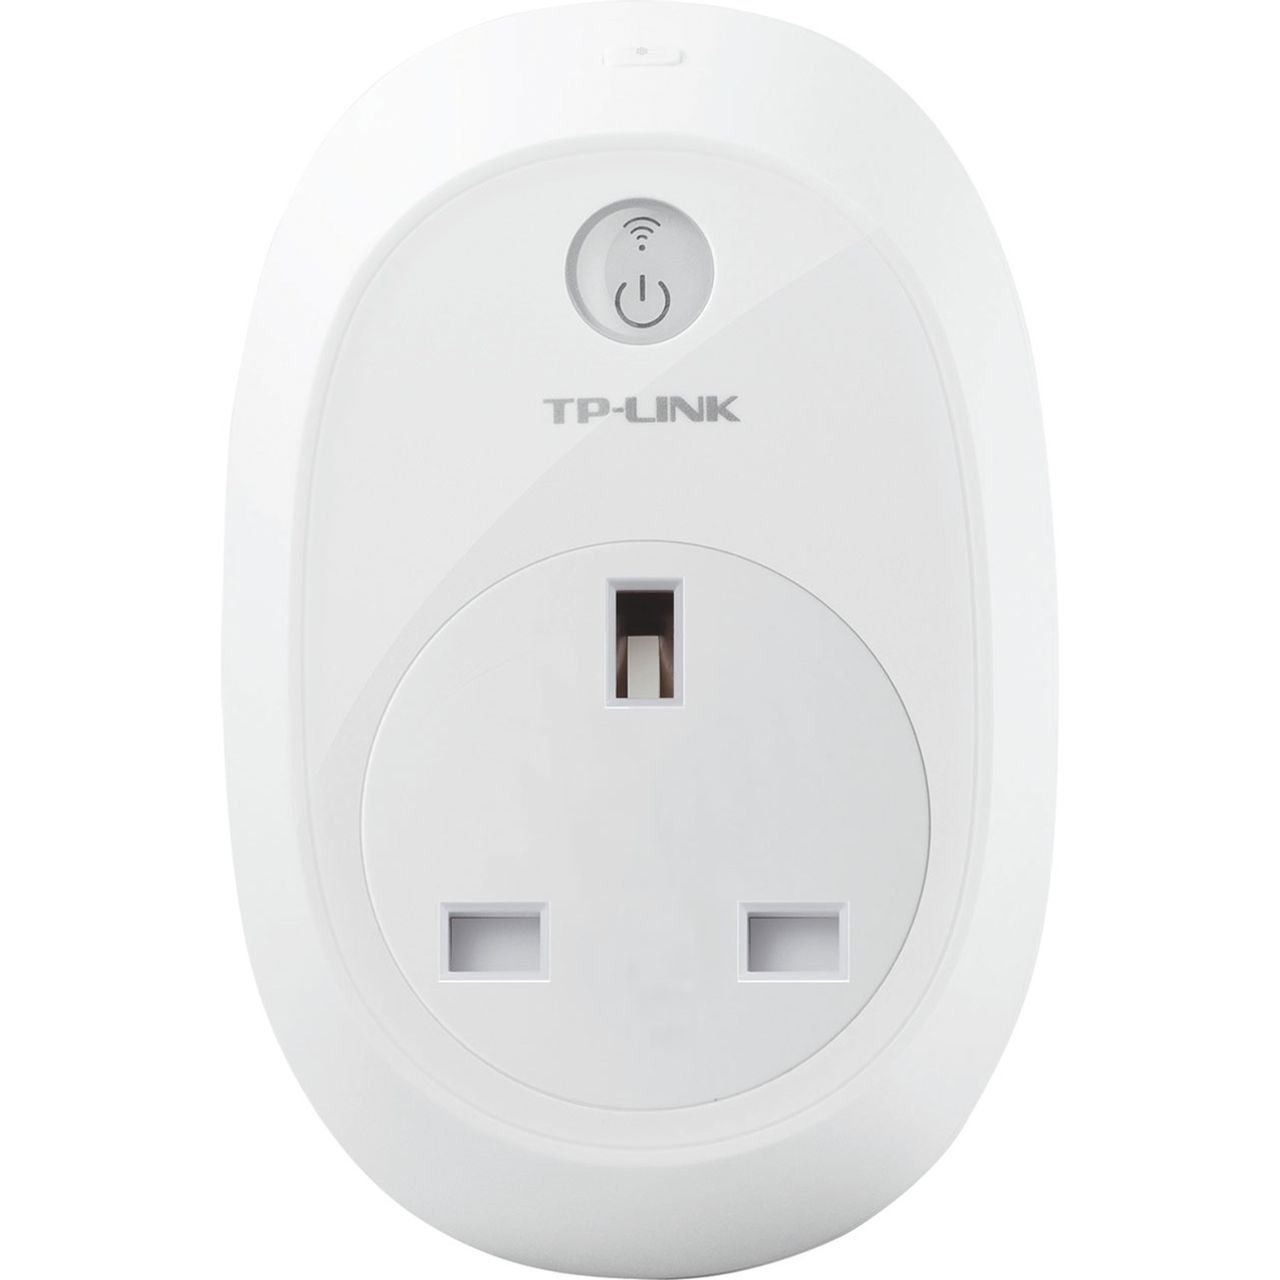 TP-Link HS110 WiFi Smart Plug with Energy Monitoring Review